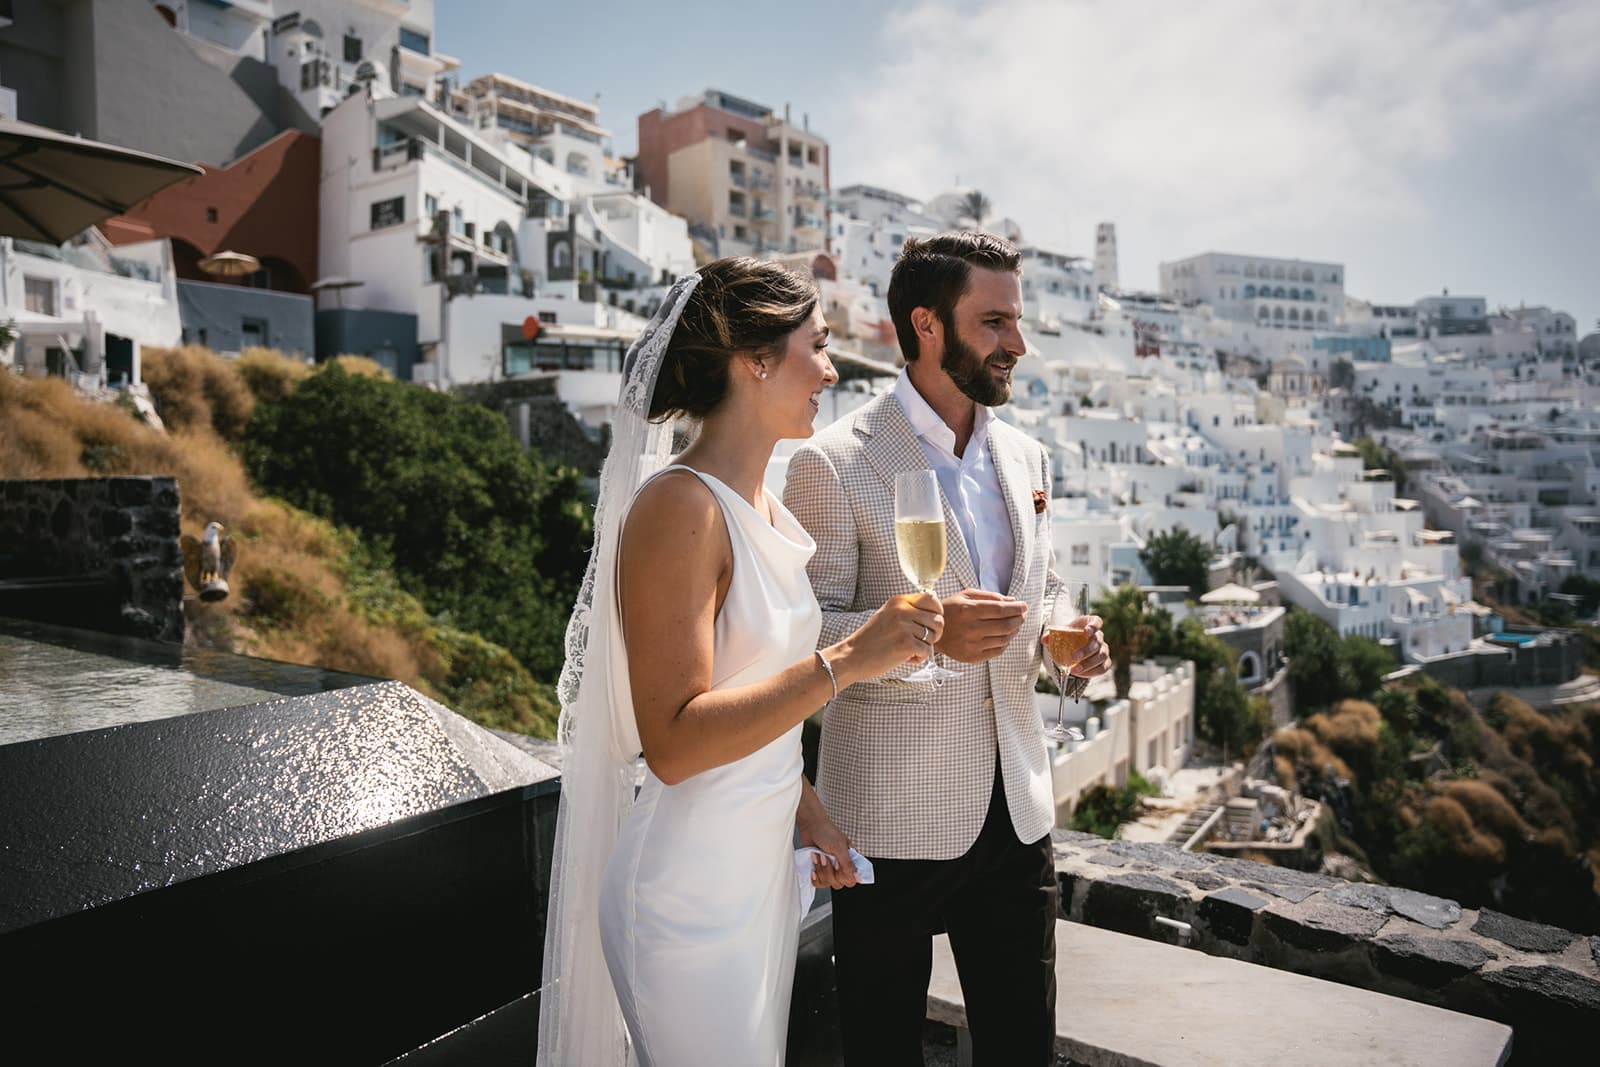 Glasses clink in celebration of love and the adventure of elopement on Santorini